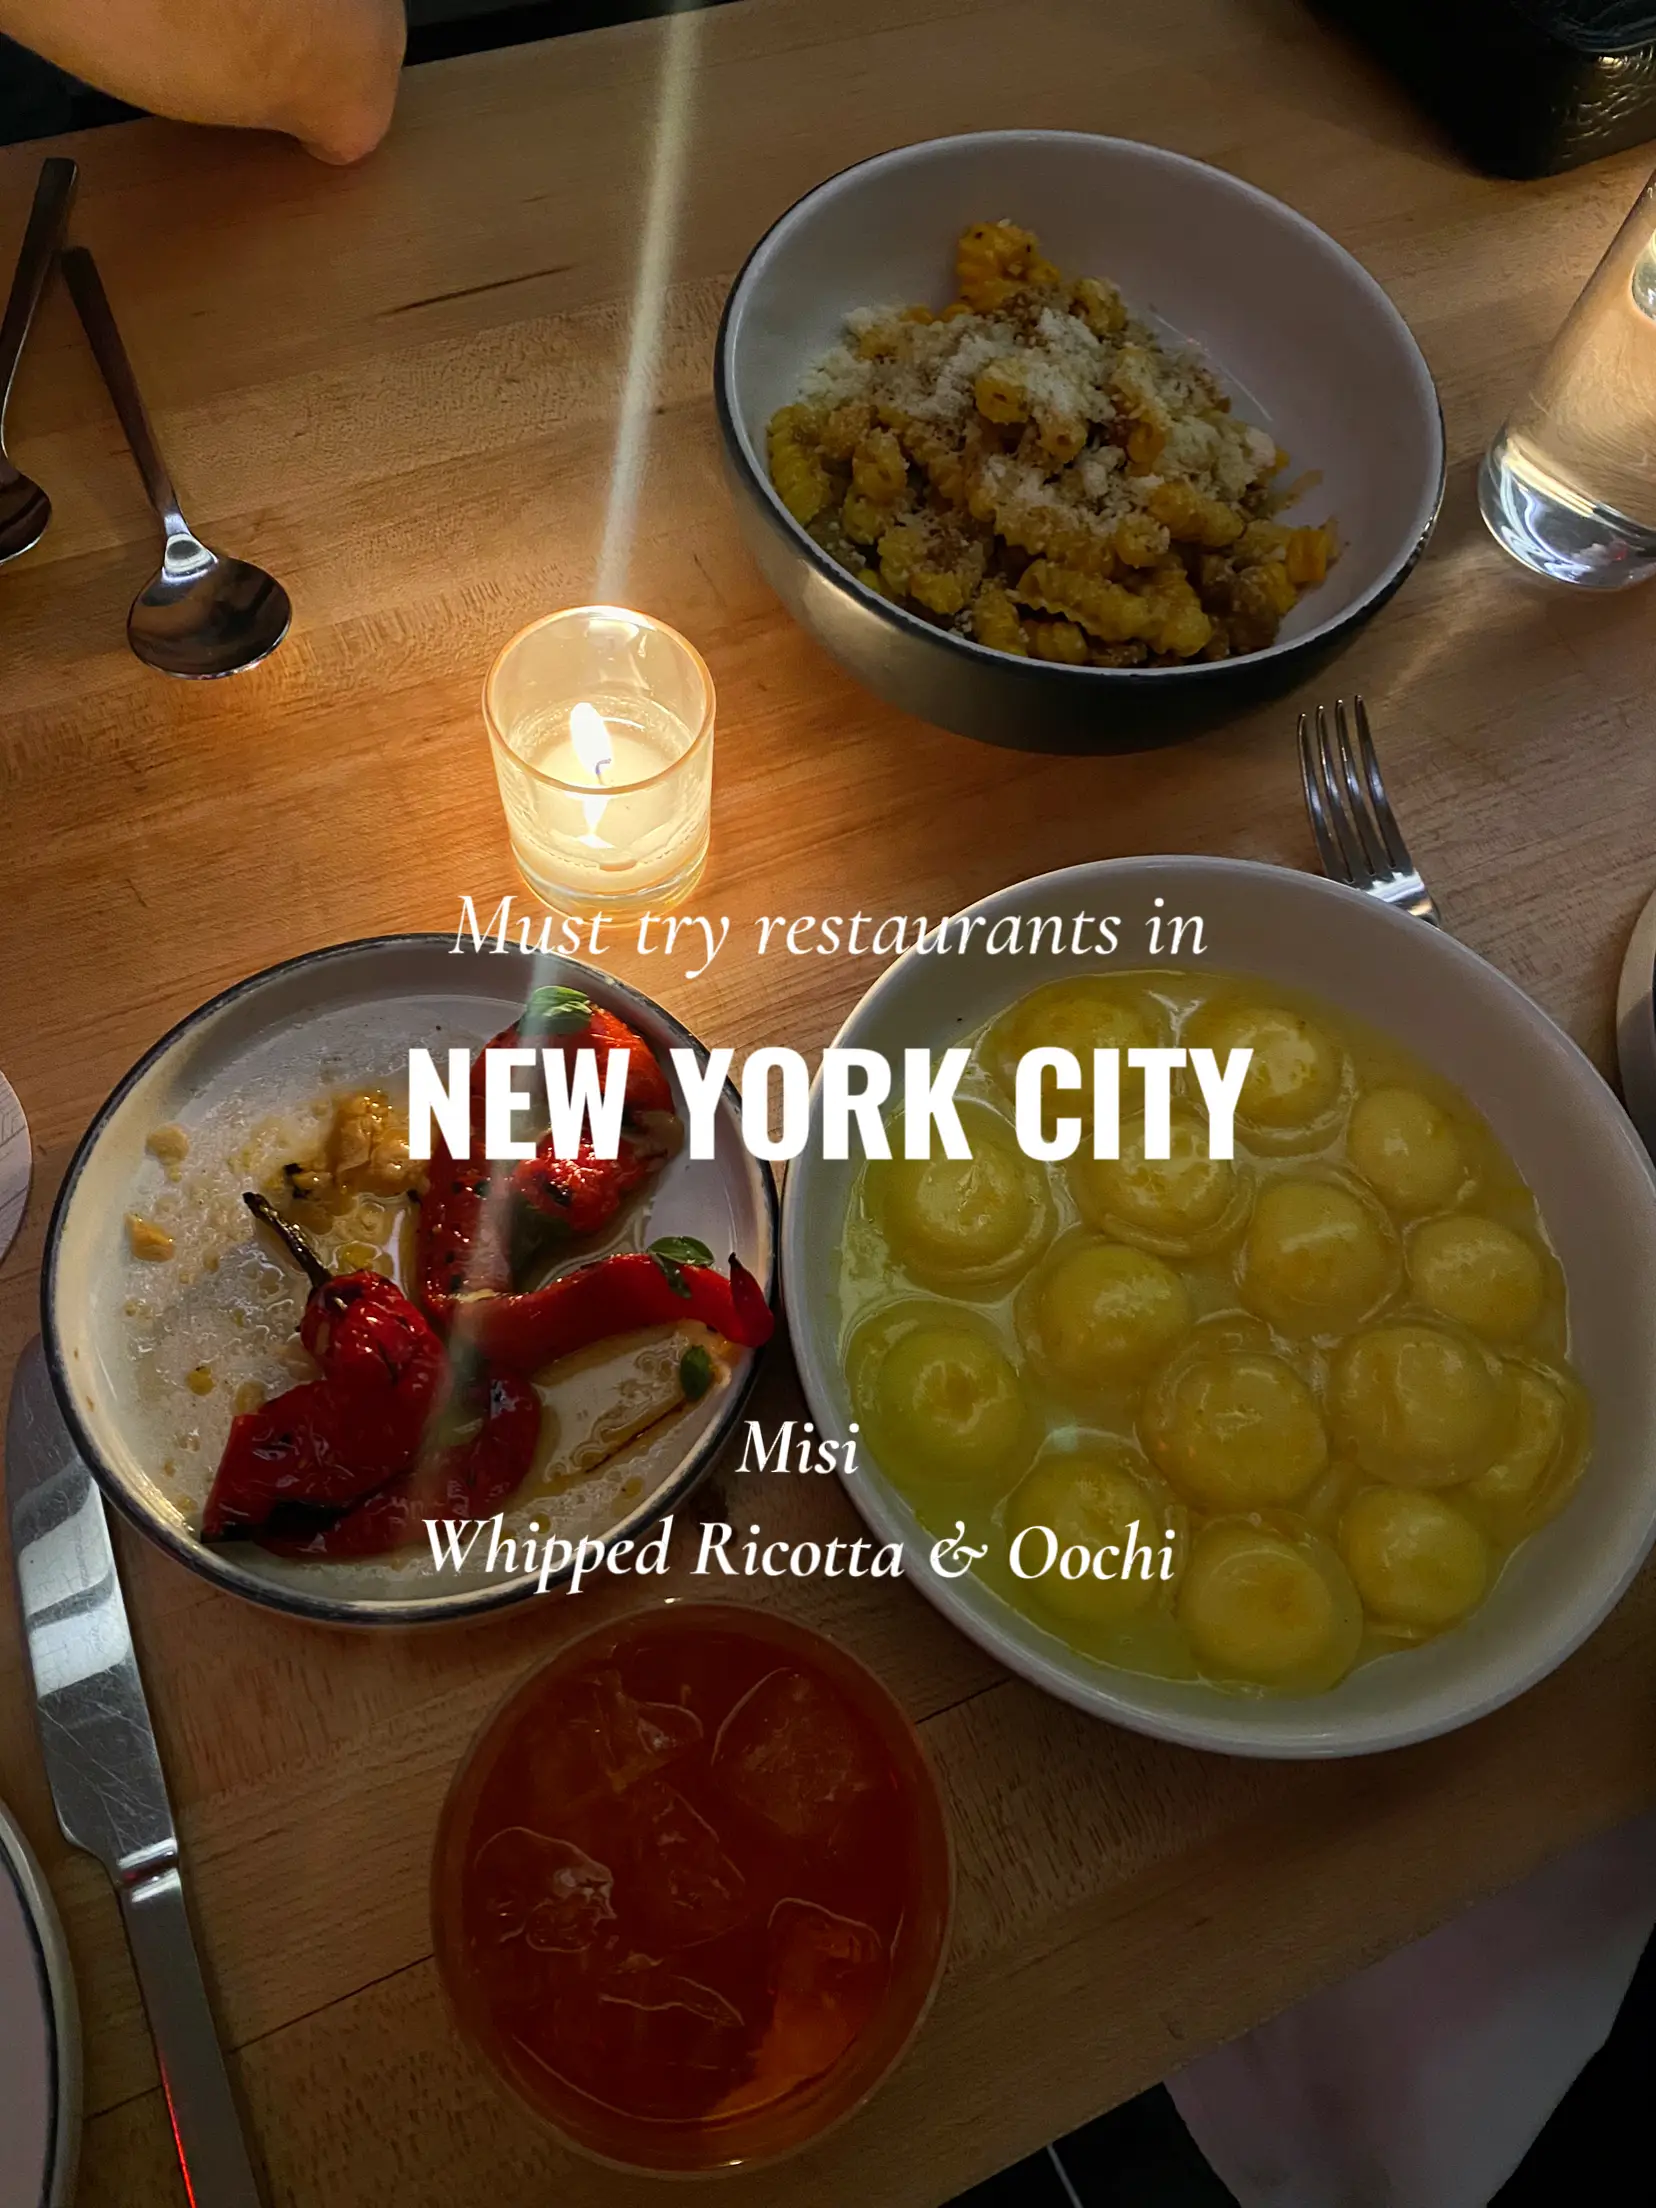 Must try restaurants in NYC's images